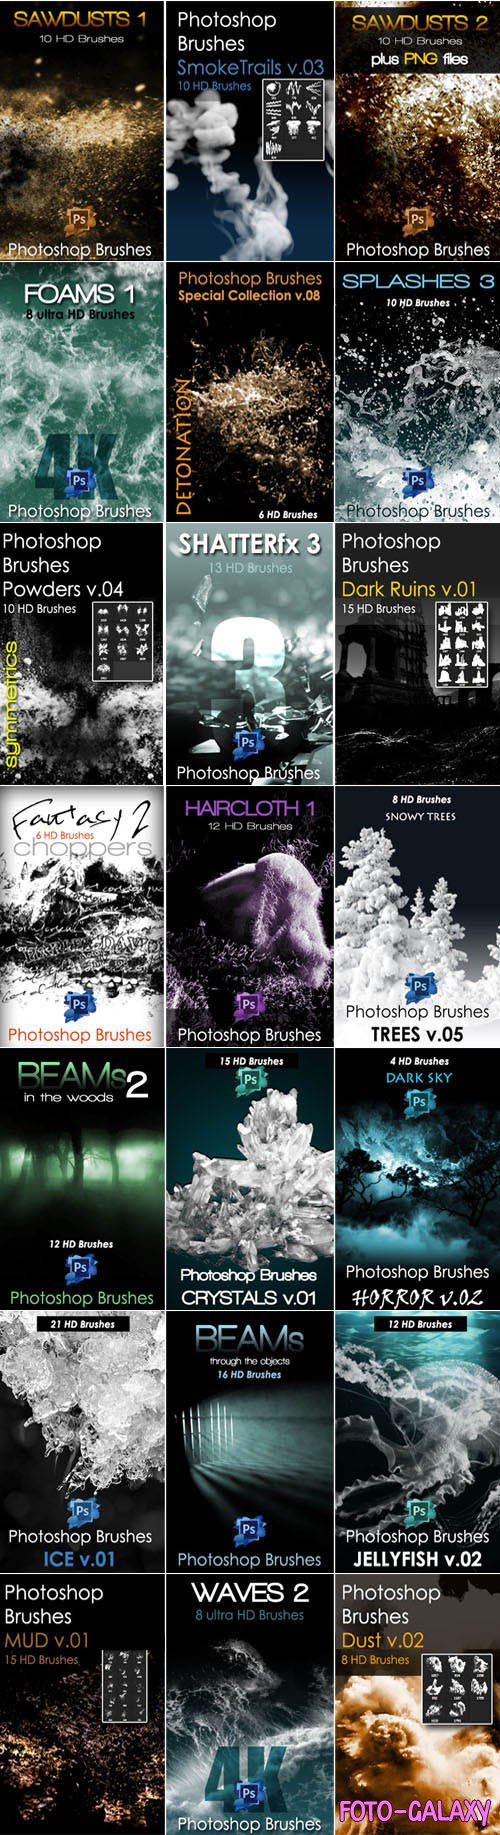 450+ Awesome Photoshop Brushes Collection - Vol.2